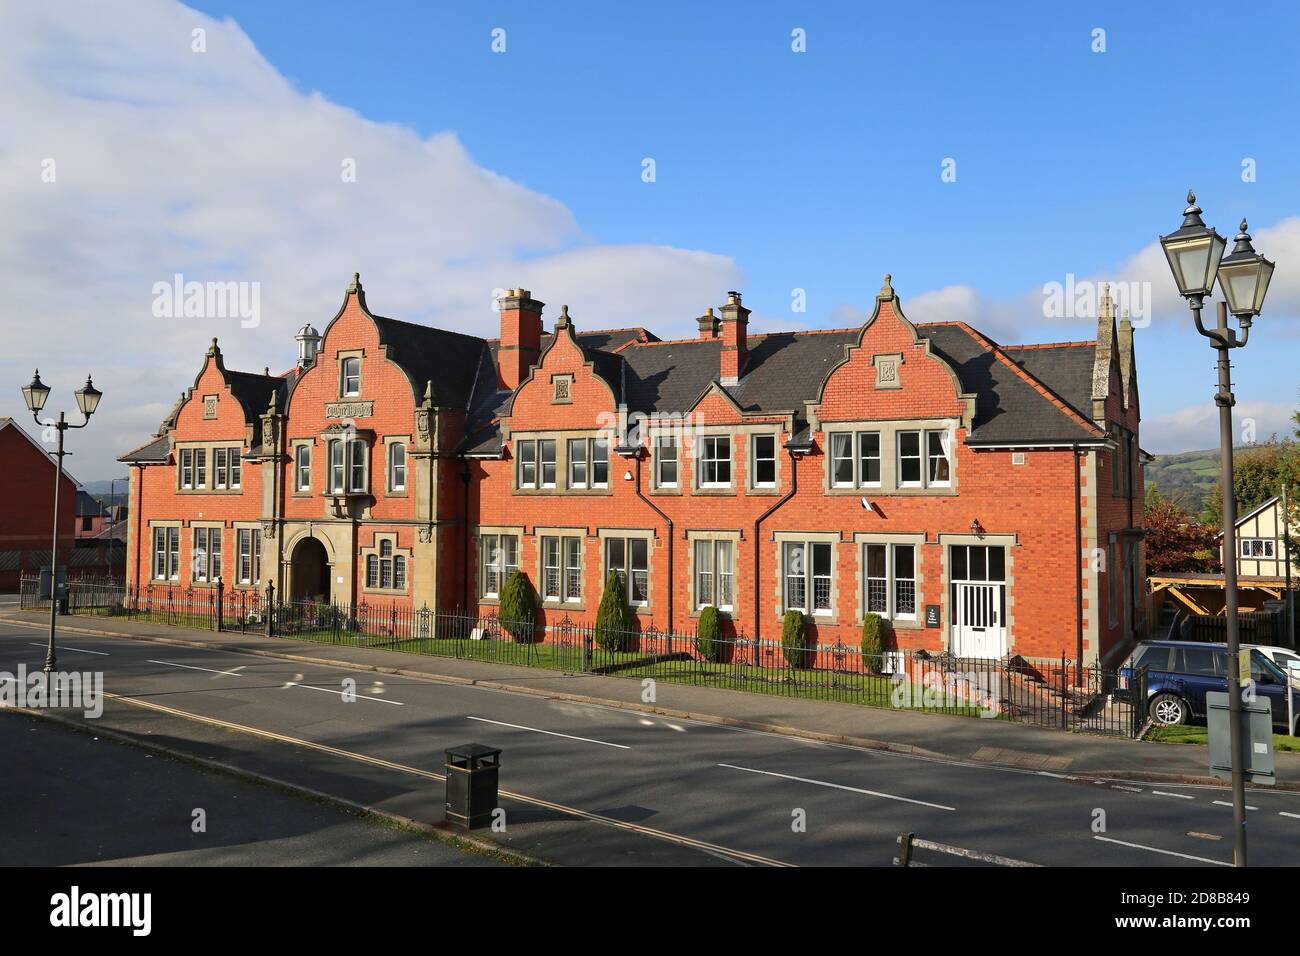 County Buildings (now private residences), High Street, Llandrindod Wells, Radnorshire, Powys, Wales, Great Britain, United Kingdom, UK, Europe Stock Photo